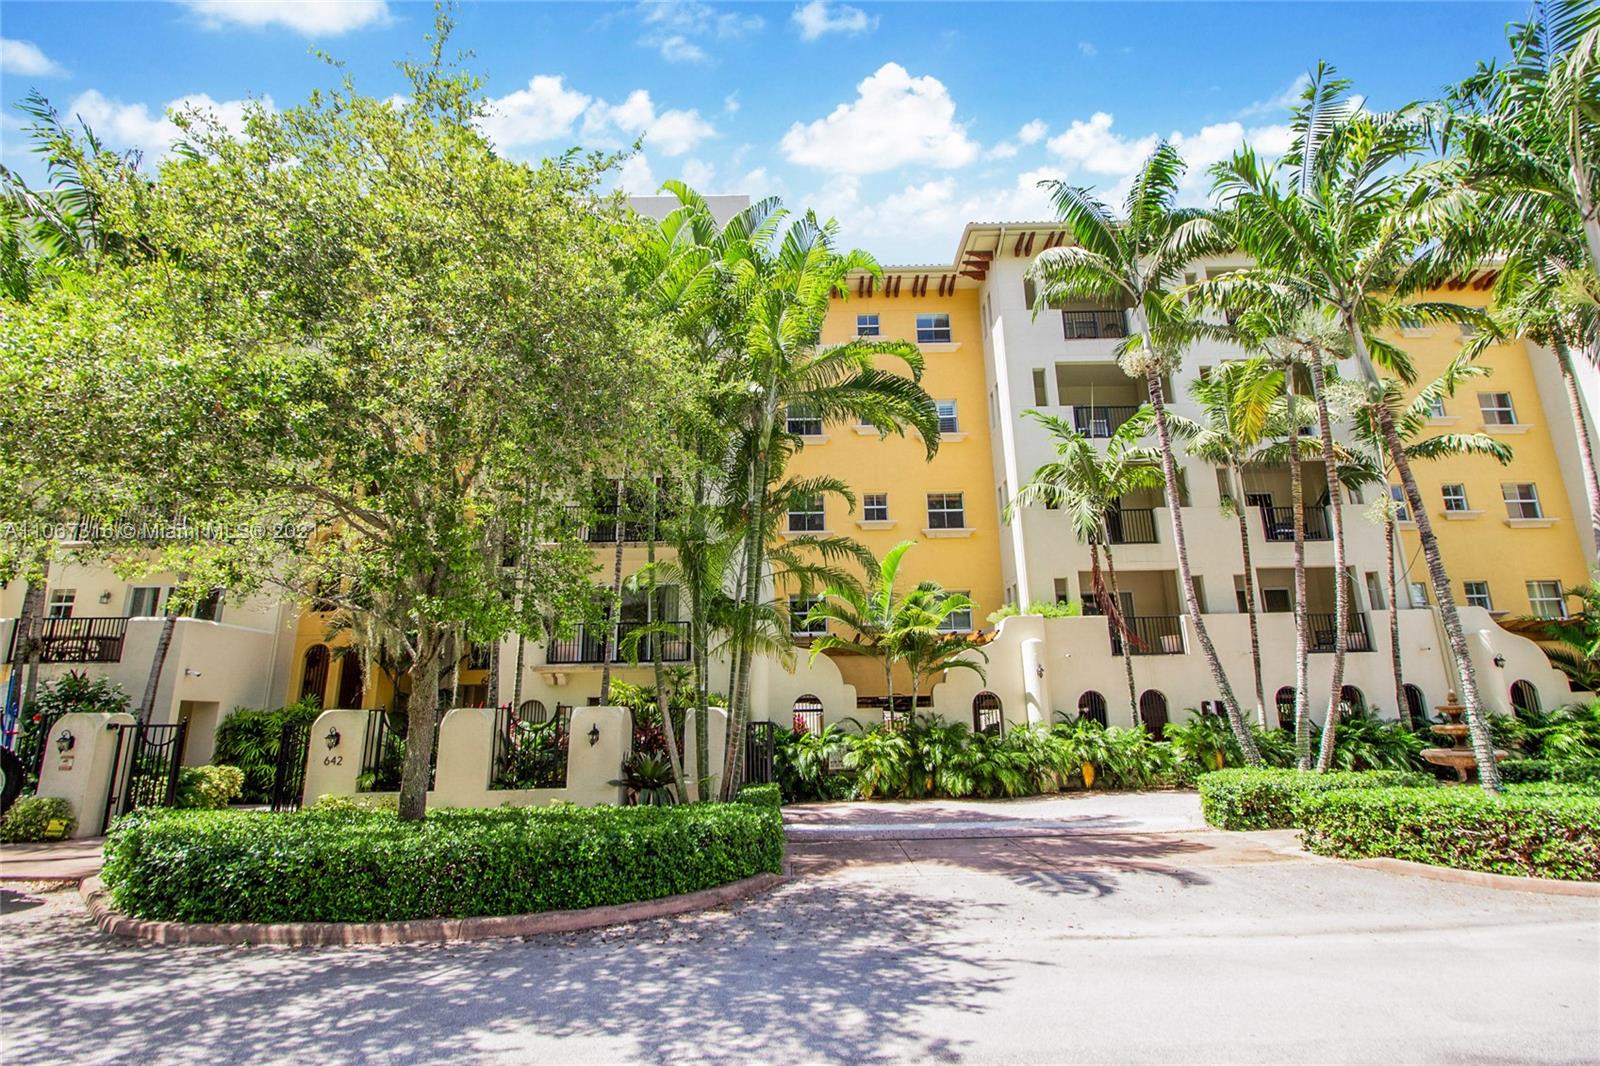 Located on a private side of Coral Gables, this 5 floors condominium residence offers a rich city lifestyle with the privacy of a boutique living. 
This exquisite Mediterranean condo has a semi-private elevator, elegant double door entry, spacious floor plan, spectacular top of the line European style kitchen, 10 FT ceilings, ONYX floors throughout, a master bathroom that showcases toilet and bidet, custom vanities, and sumptuous freestanding shower and Jacuzzi tub.  Exterior features include a private serene community with a stunning tropical Mediterranean facade.  Near the area’s best boutique shopping, Merrick Park, fine dining, entertainment, Venetian Pool, Coral Gables Athletic Club, Miracle Mile, Univeristy of Miami, Biltmore Hotel and much more